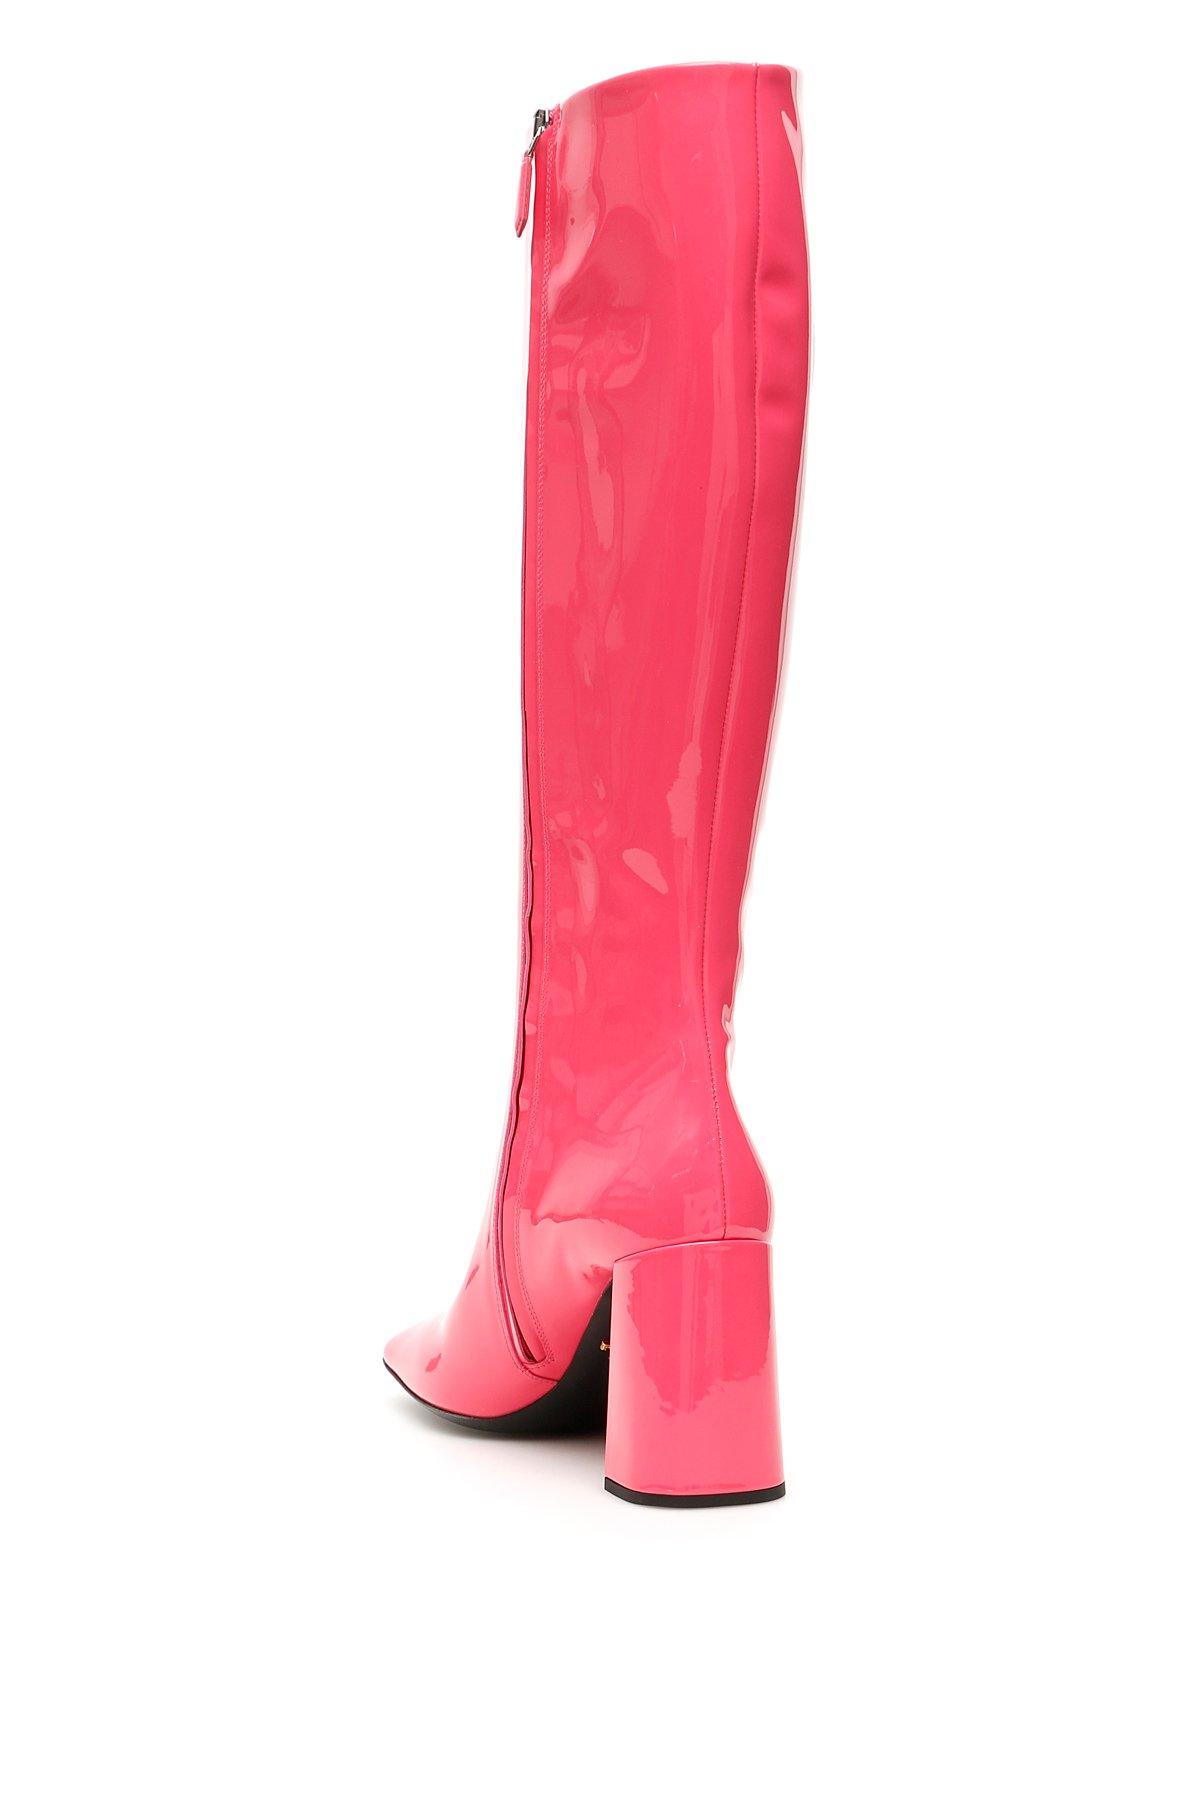 Prada Leather Knee High Boots in Pink,Fuchsia (Pink) | Lyst Canada